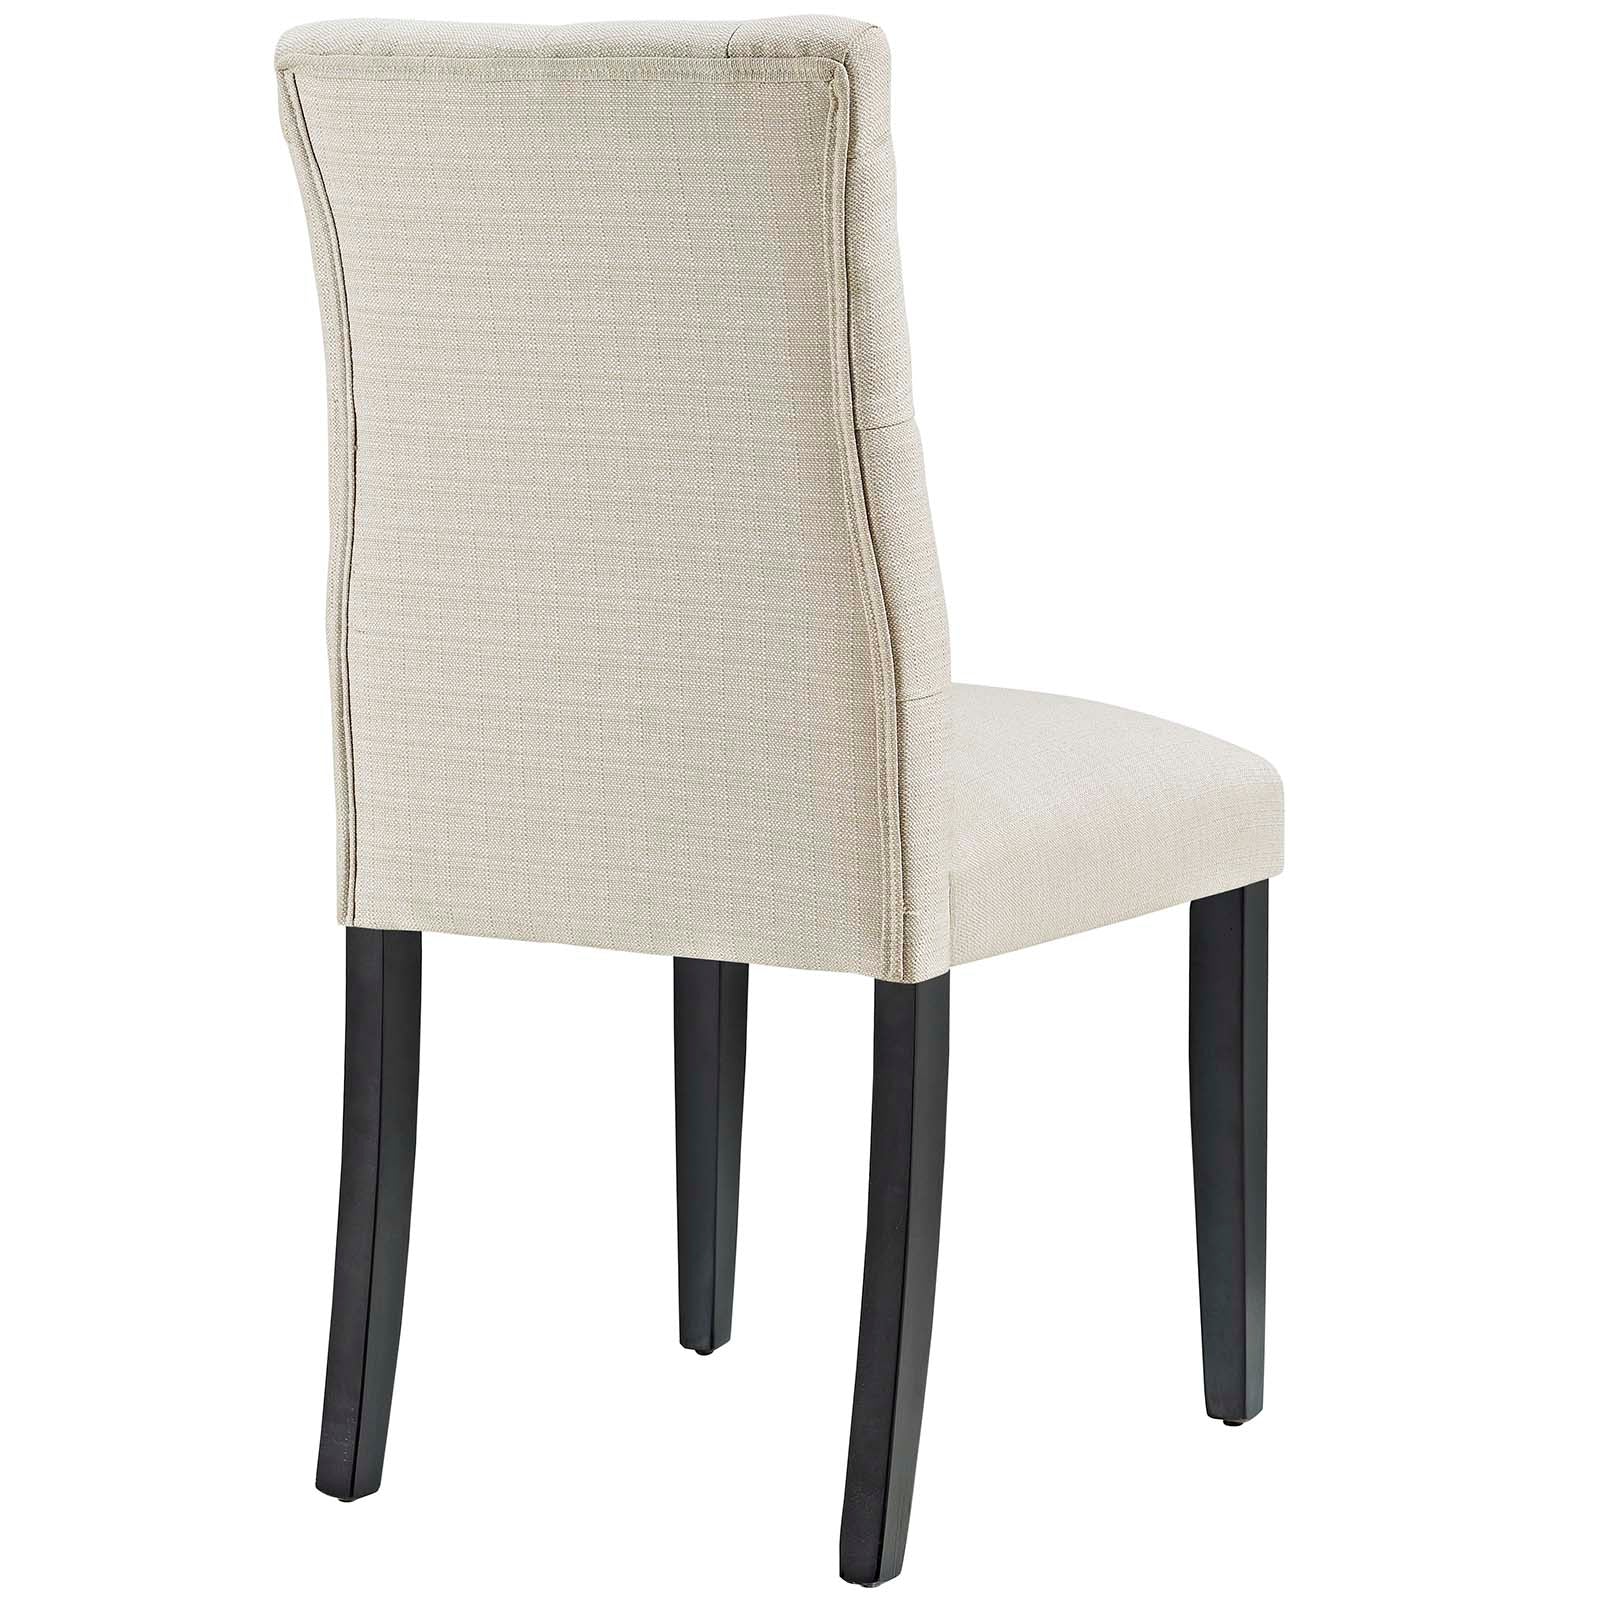 Modway Dining Chairs - Duchess Dining Chair Fabric Beige (Set of 2)